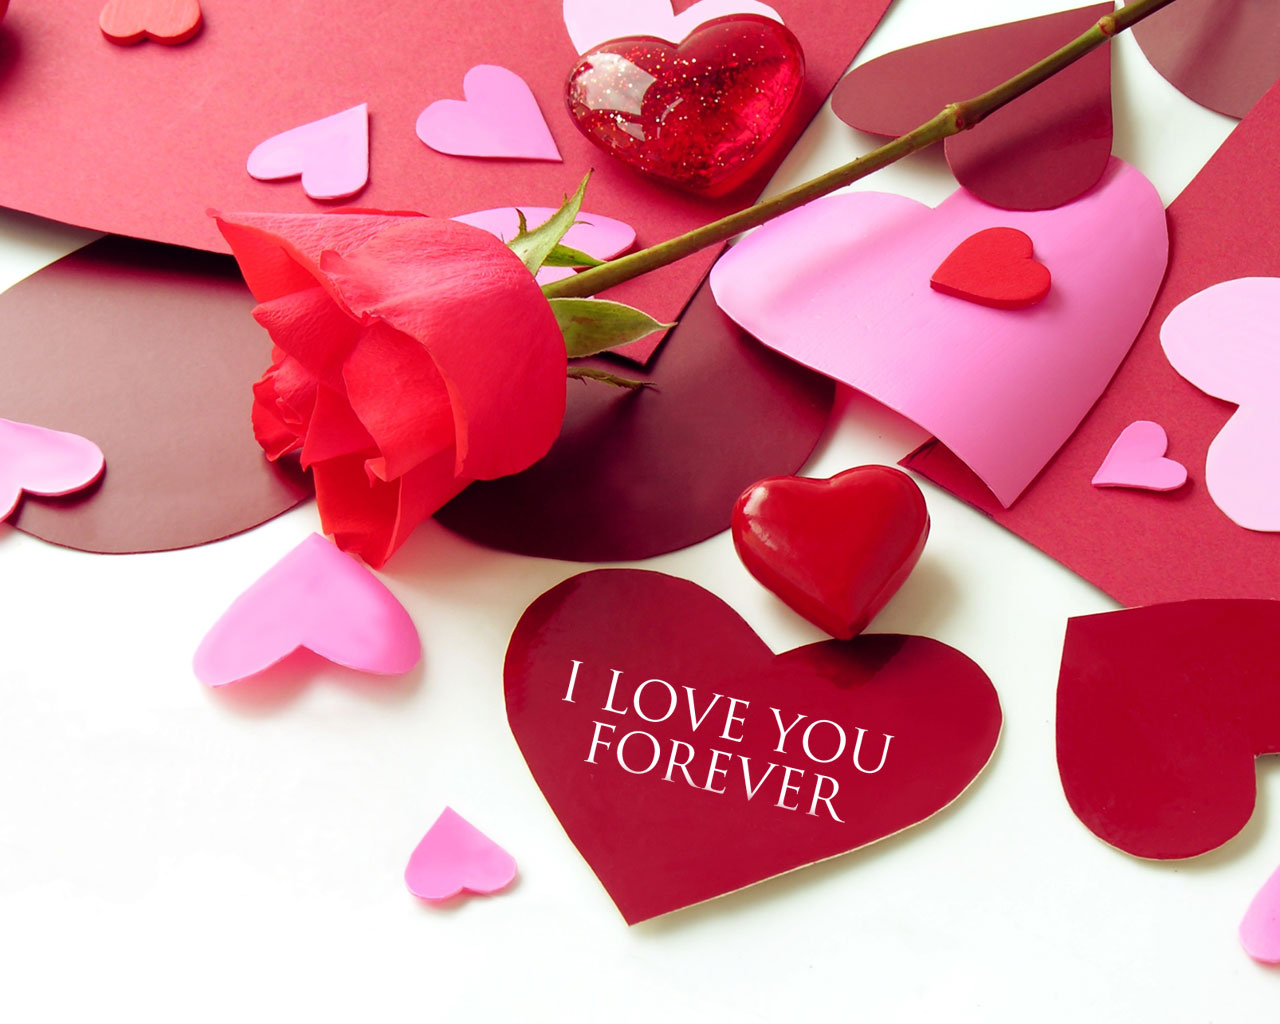 Free download Top 14 Valentine wallpaper for Windows 81 All for ...